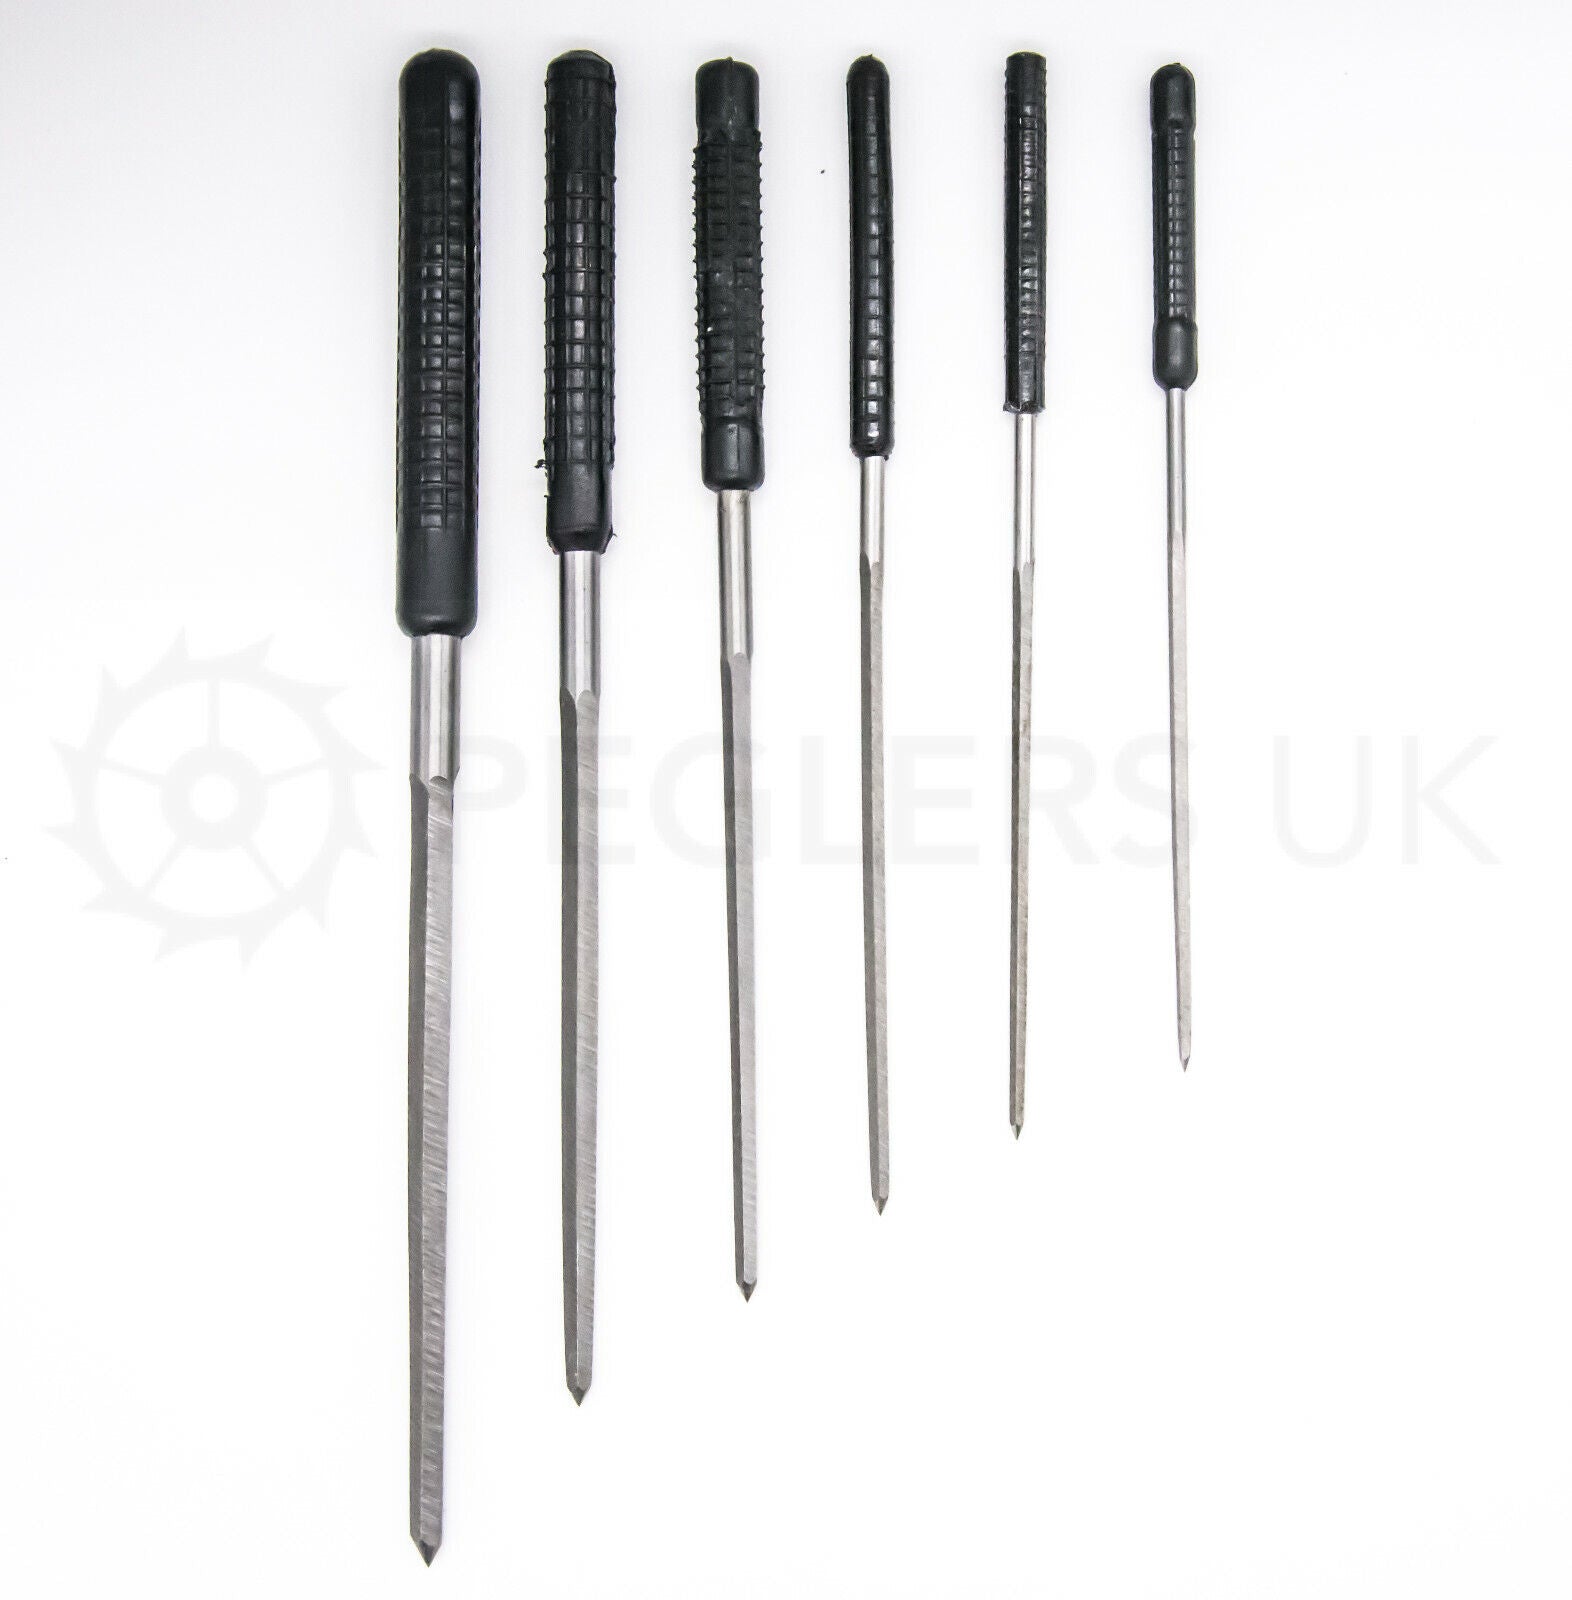 Set of 6 Cutting Broaches 2.4 - 6.2 mm